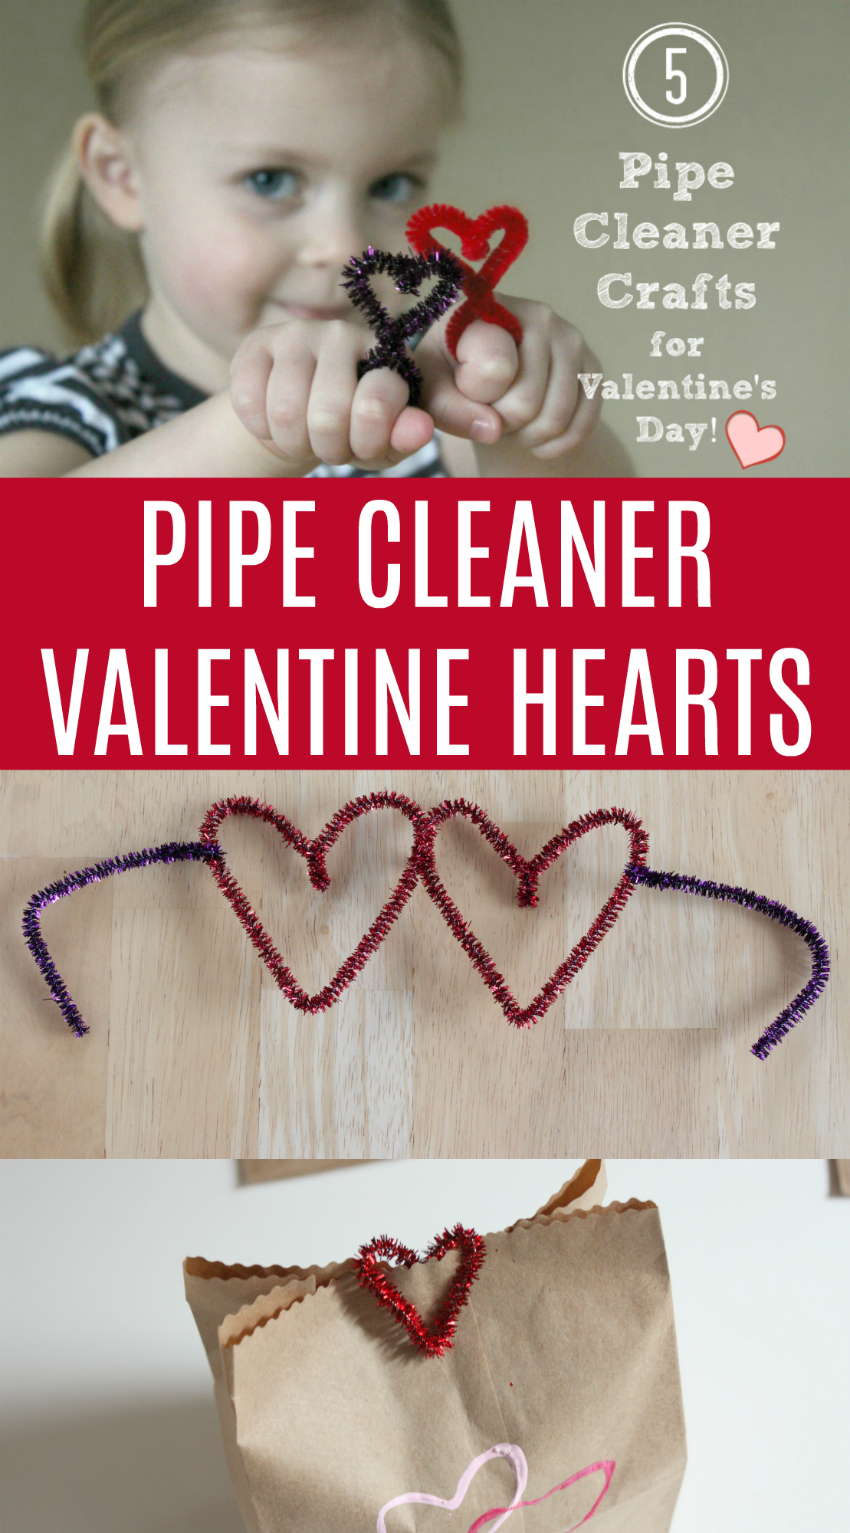 Pipe Cleaner Valentine Hearts to make